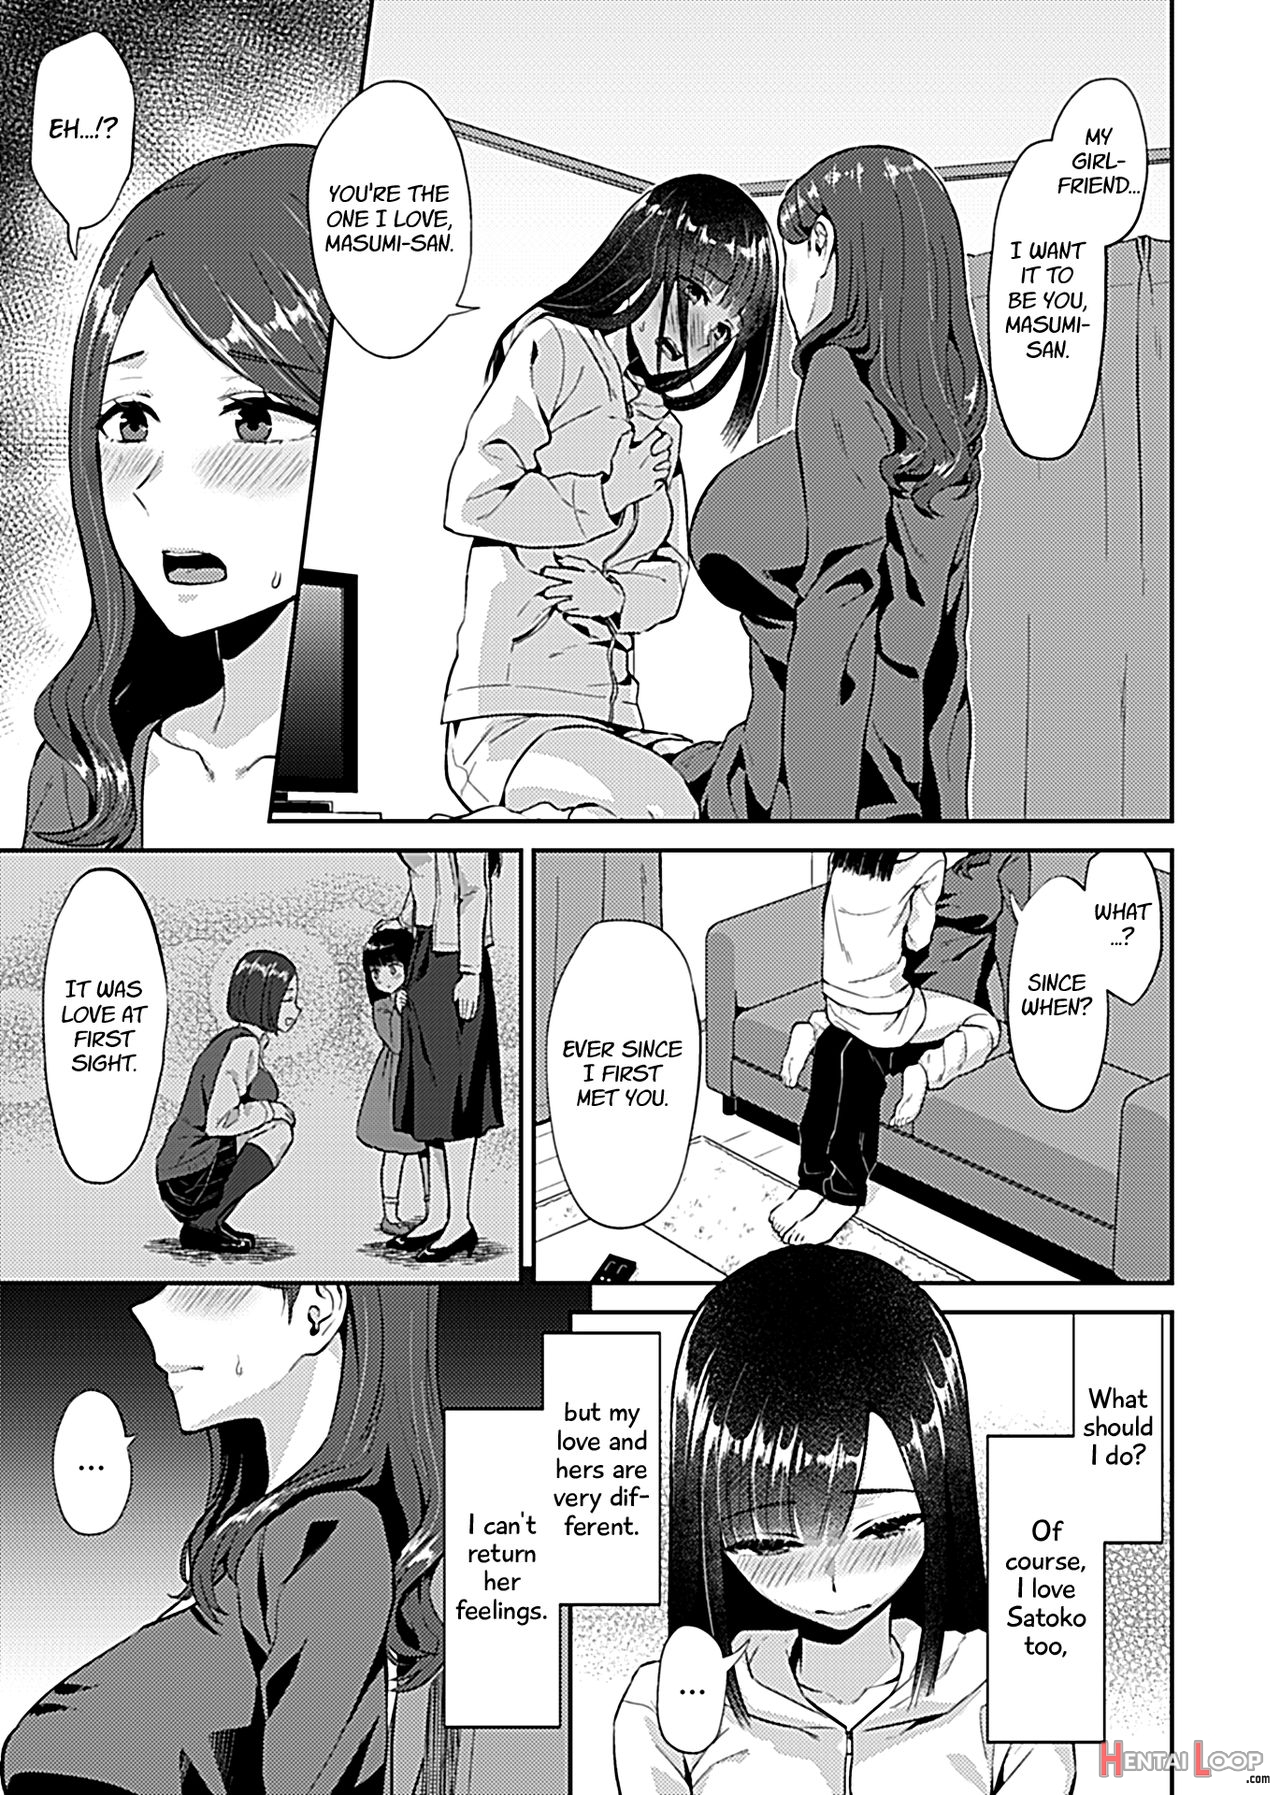 Lilies Are In Full Bloom - Volume 1 page 7